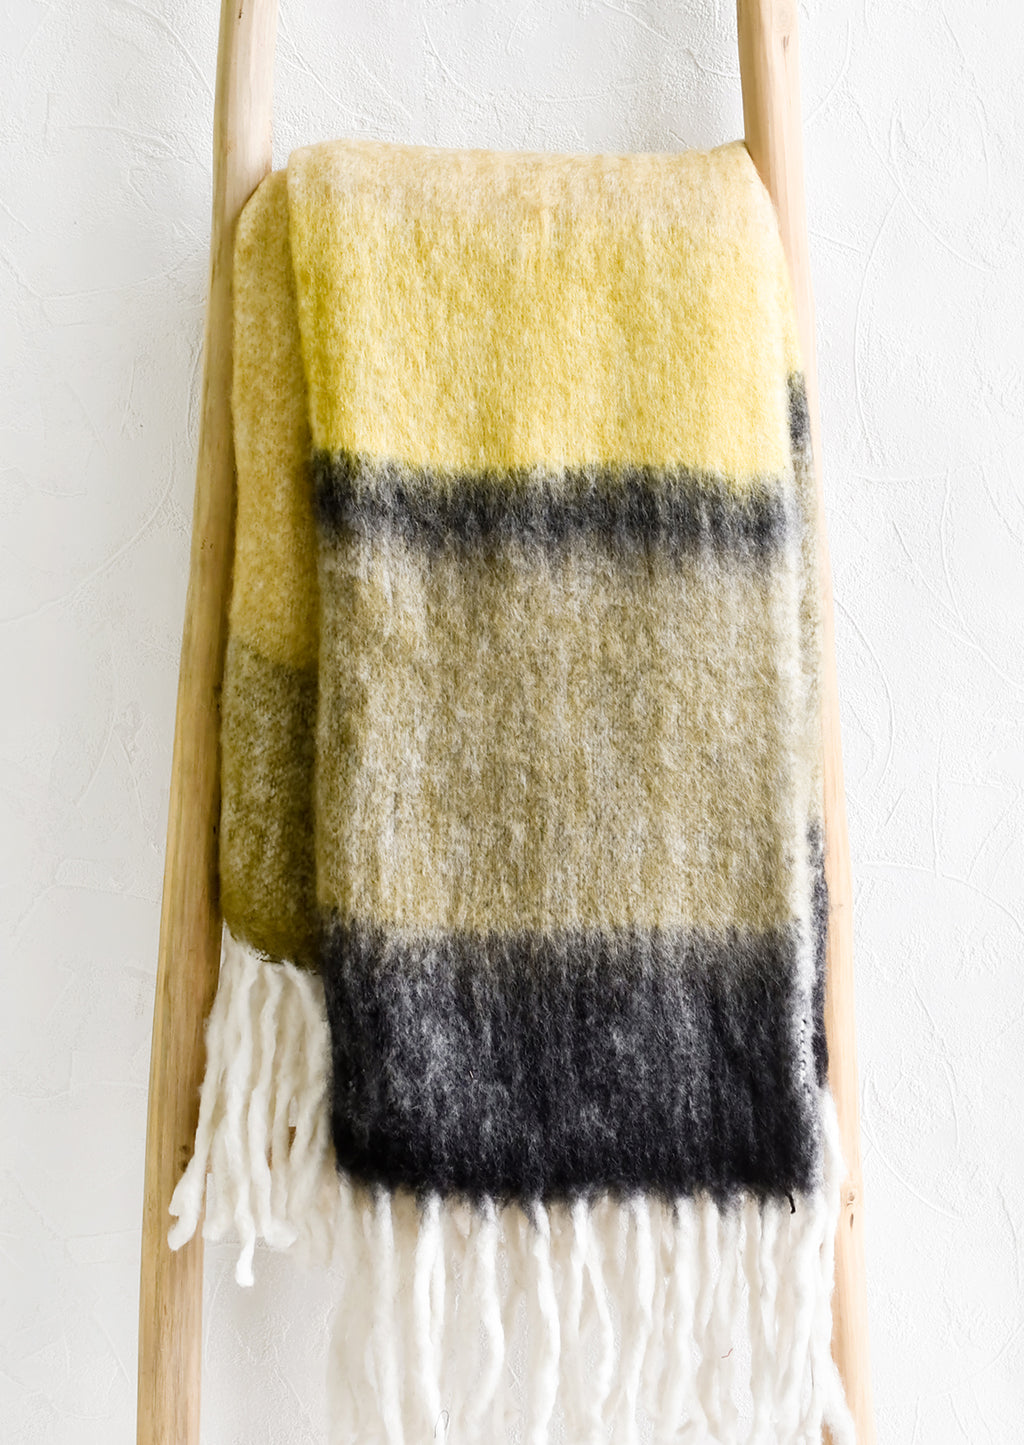 Dune Multi: A striped mohair throw blanket in tones of yellow and black.